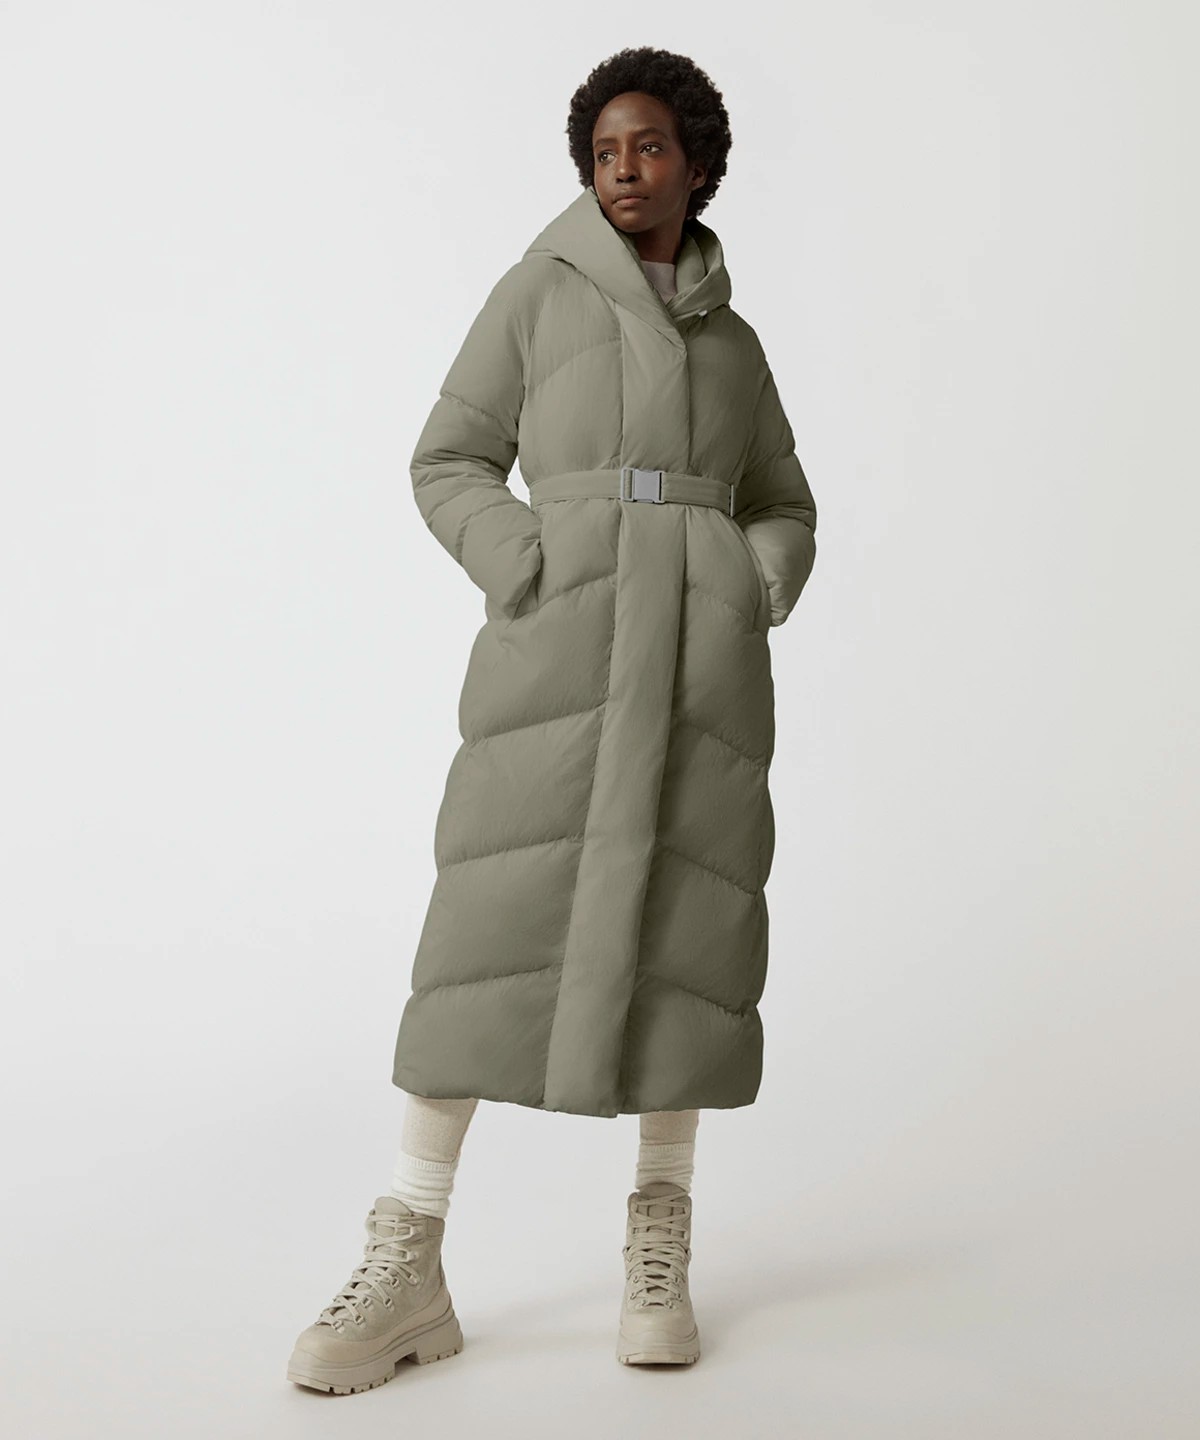 Image of a model wearing a Canada Goose Marlow parka. The parka is long with chevron quilting pattern in a sage hue.